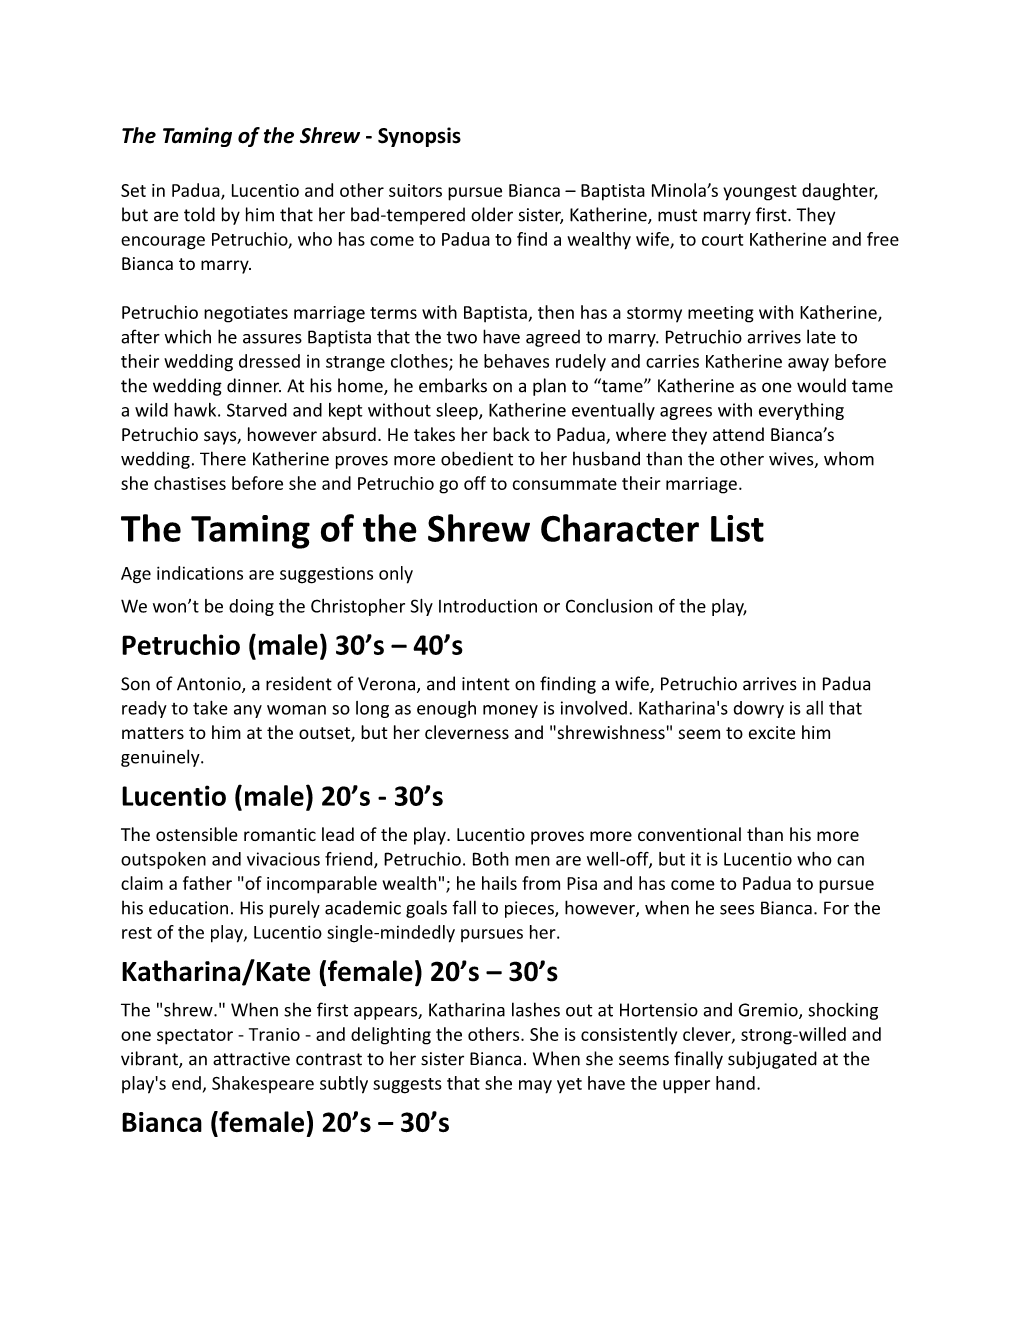 The Taming of the Shrew - Synopsis